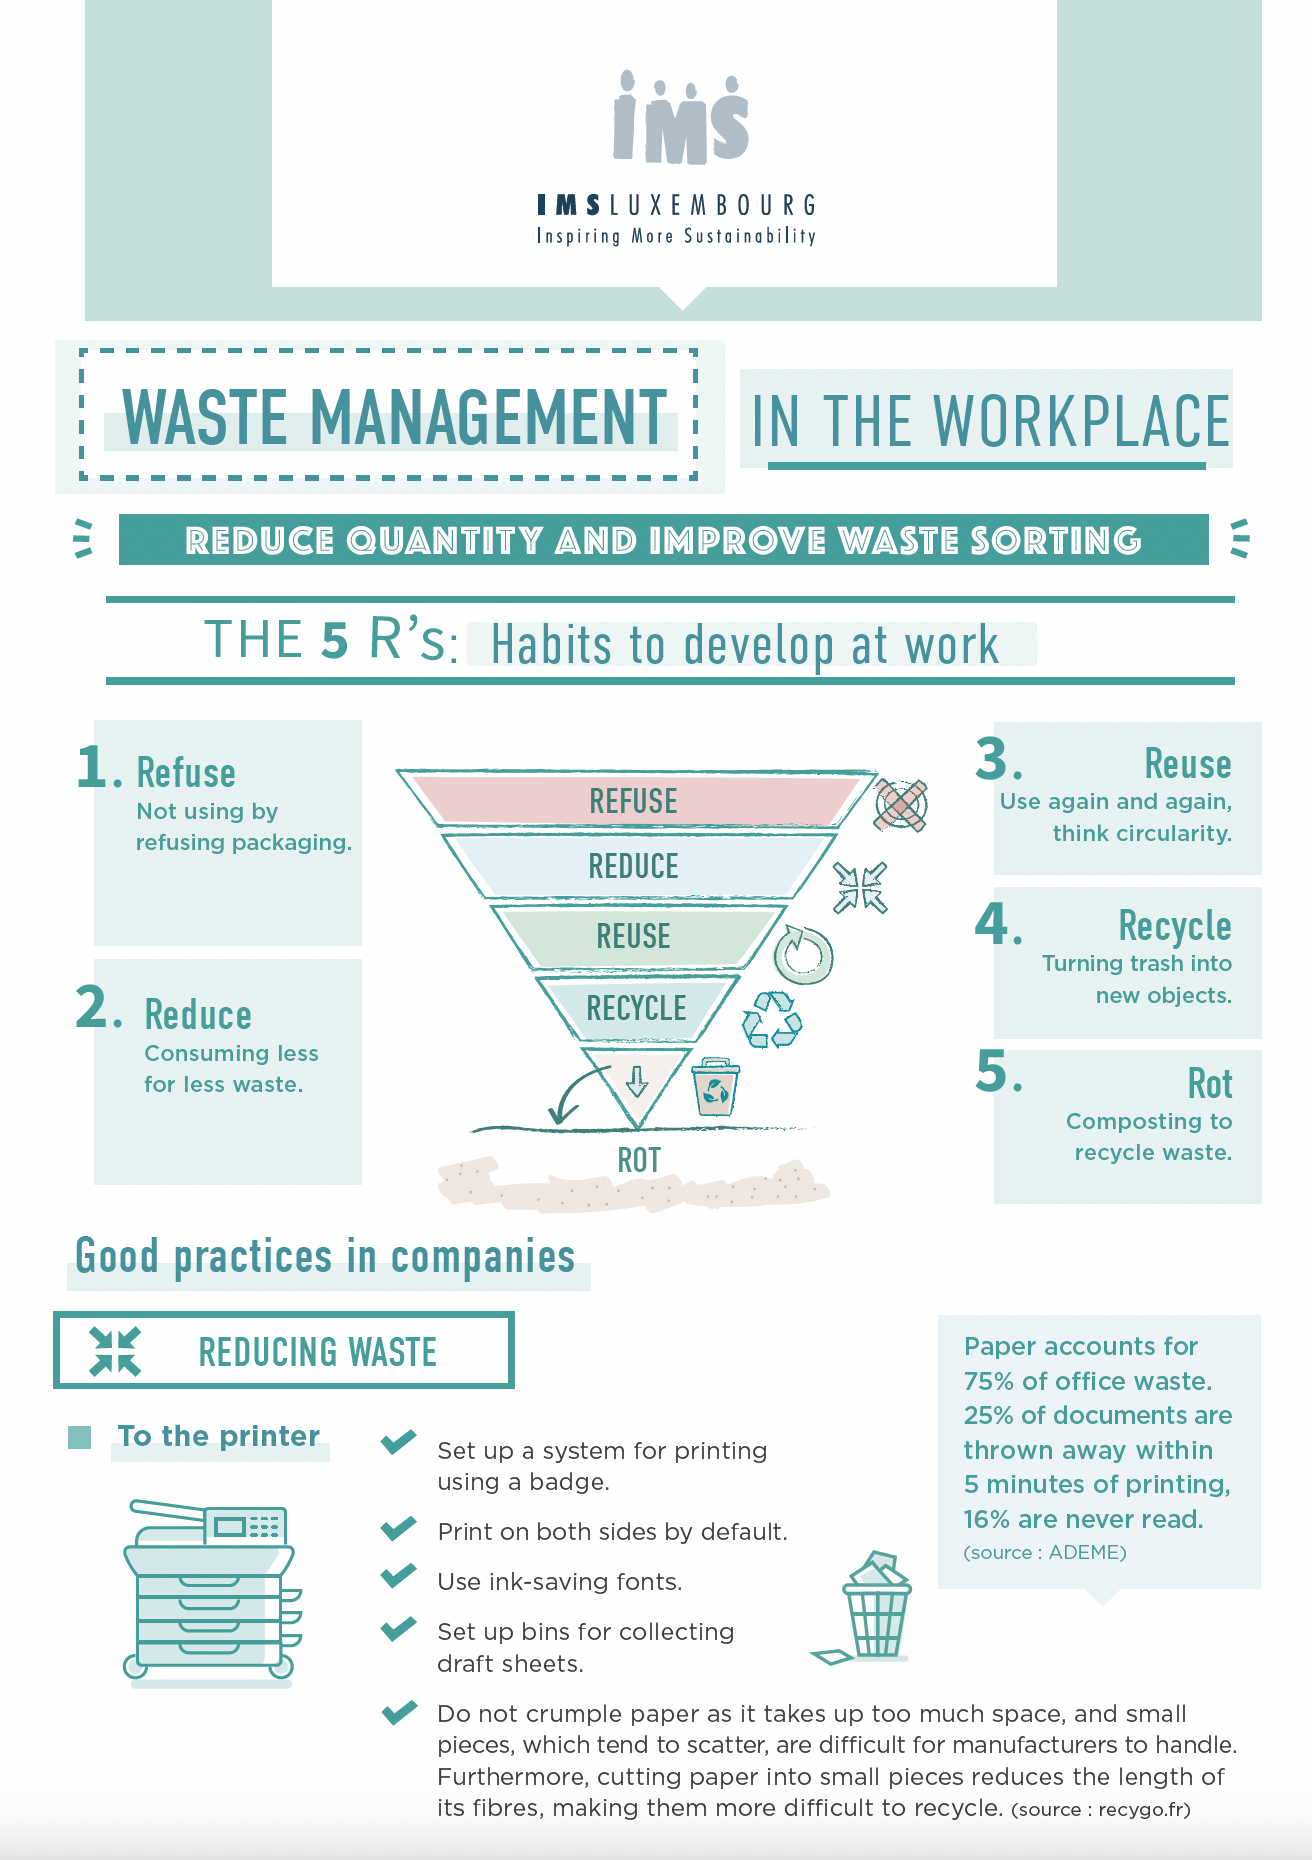 Waste management in the workplace